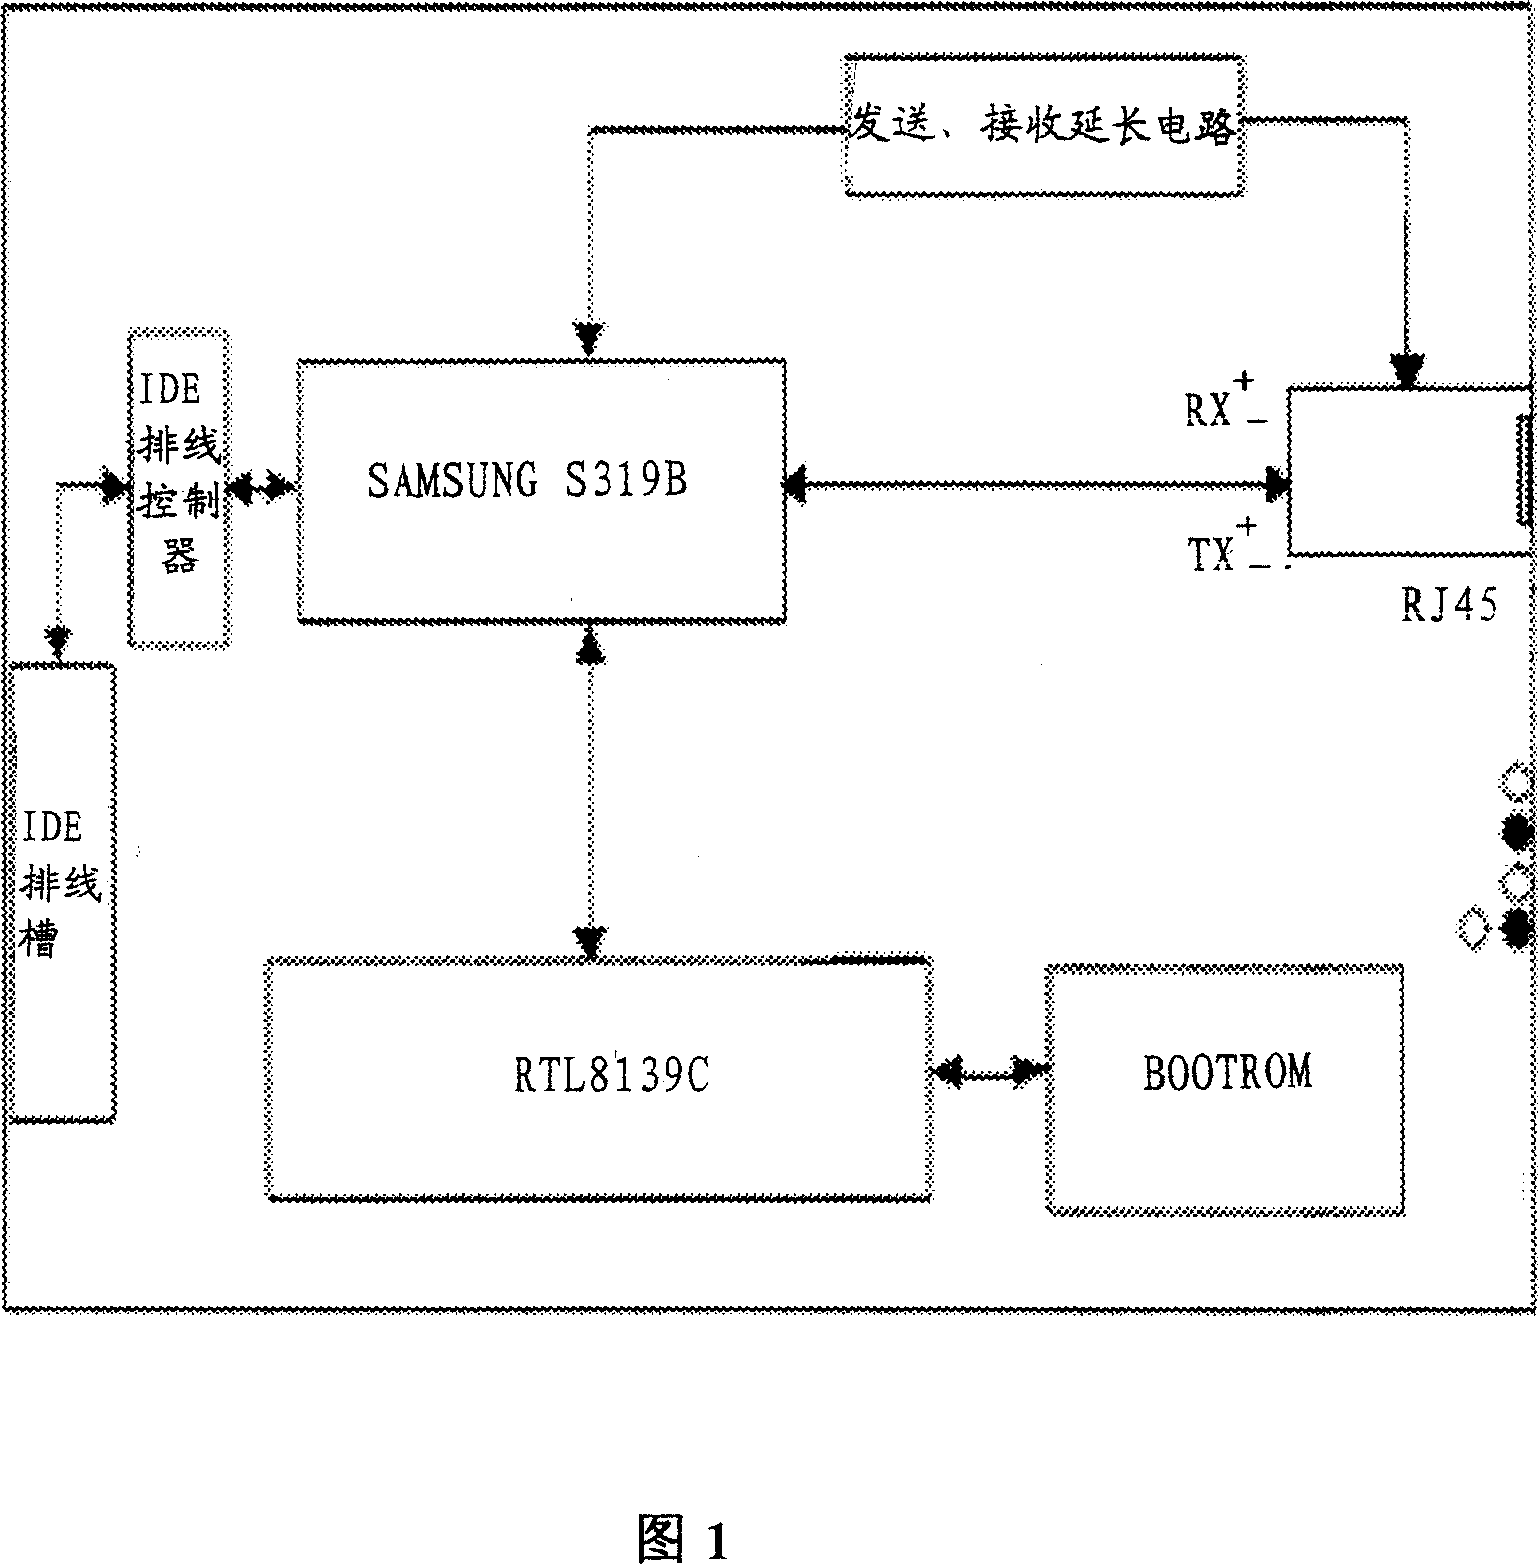 Physical separated card with single network port